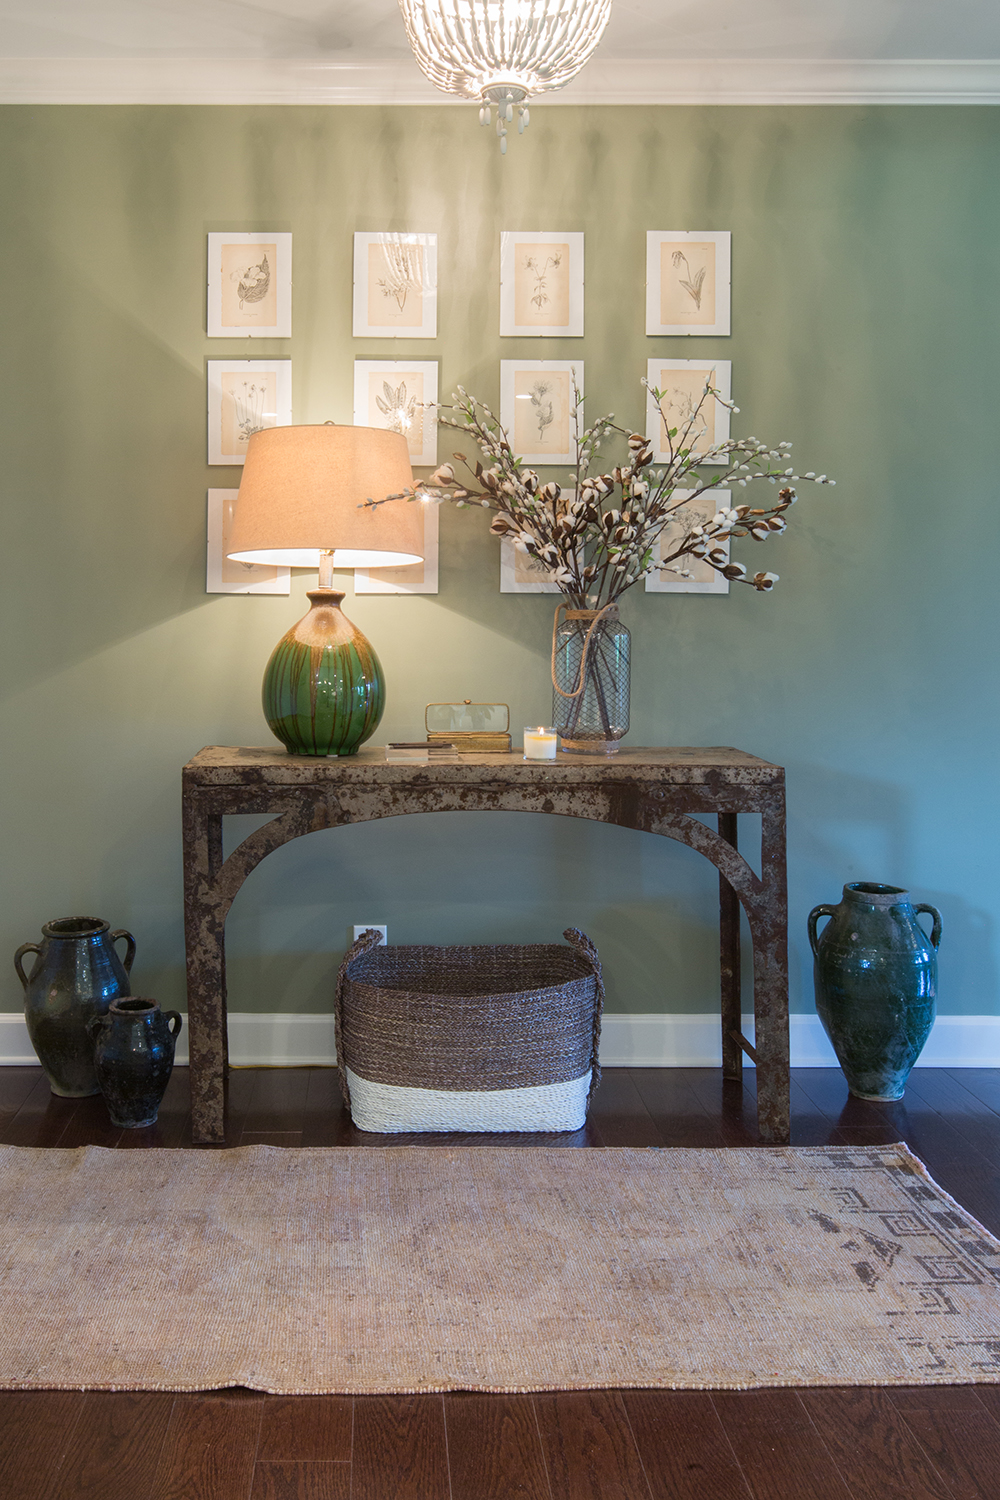 Vintage entry table topped with a large green ceramic lamp, a vase filled with cotton sprigs, three large ceramic vessels on the ground, a large woven basket on dark wood floors, a vintage rug, and a green wall with 12 framed vintage botanical prints hung on it